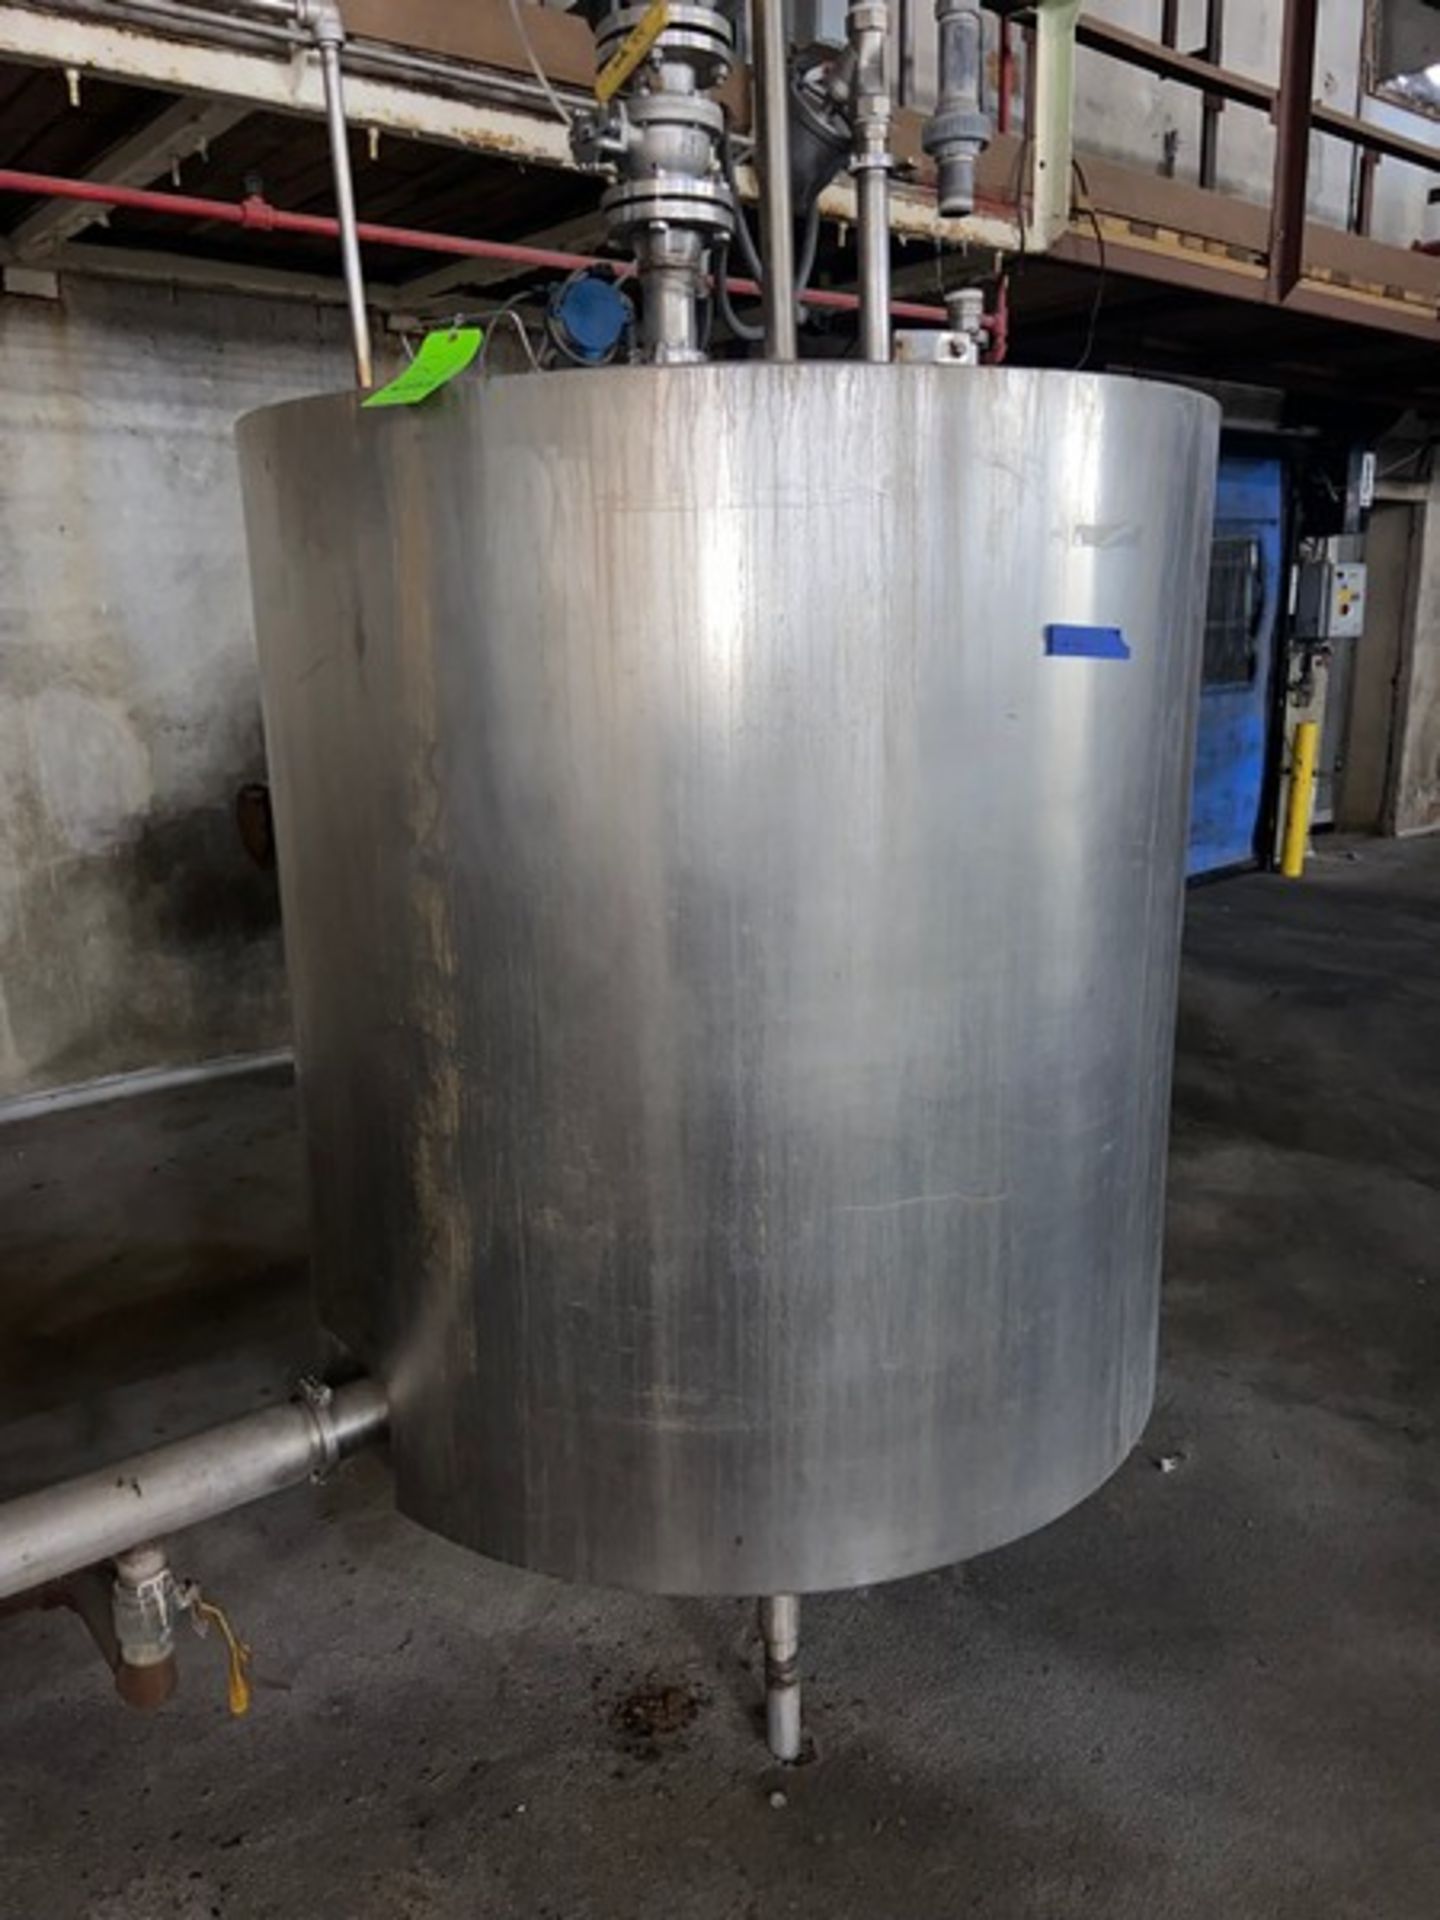 Damrow Bros. 400 Gal. S/S Vertical Insulated Tank, S/N 25609, with S/S Hinge Lid, Mounted on S/S